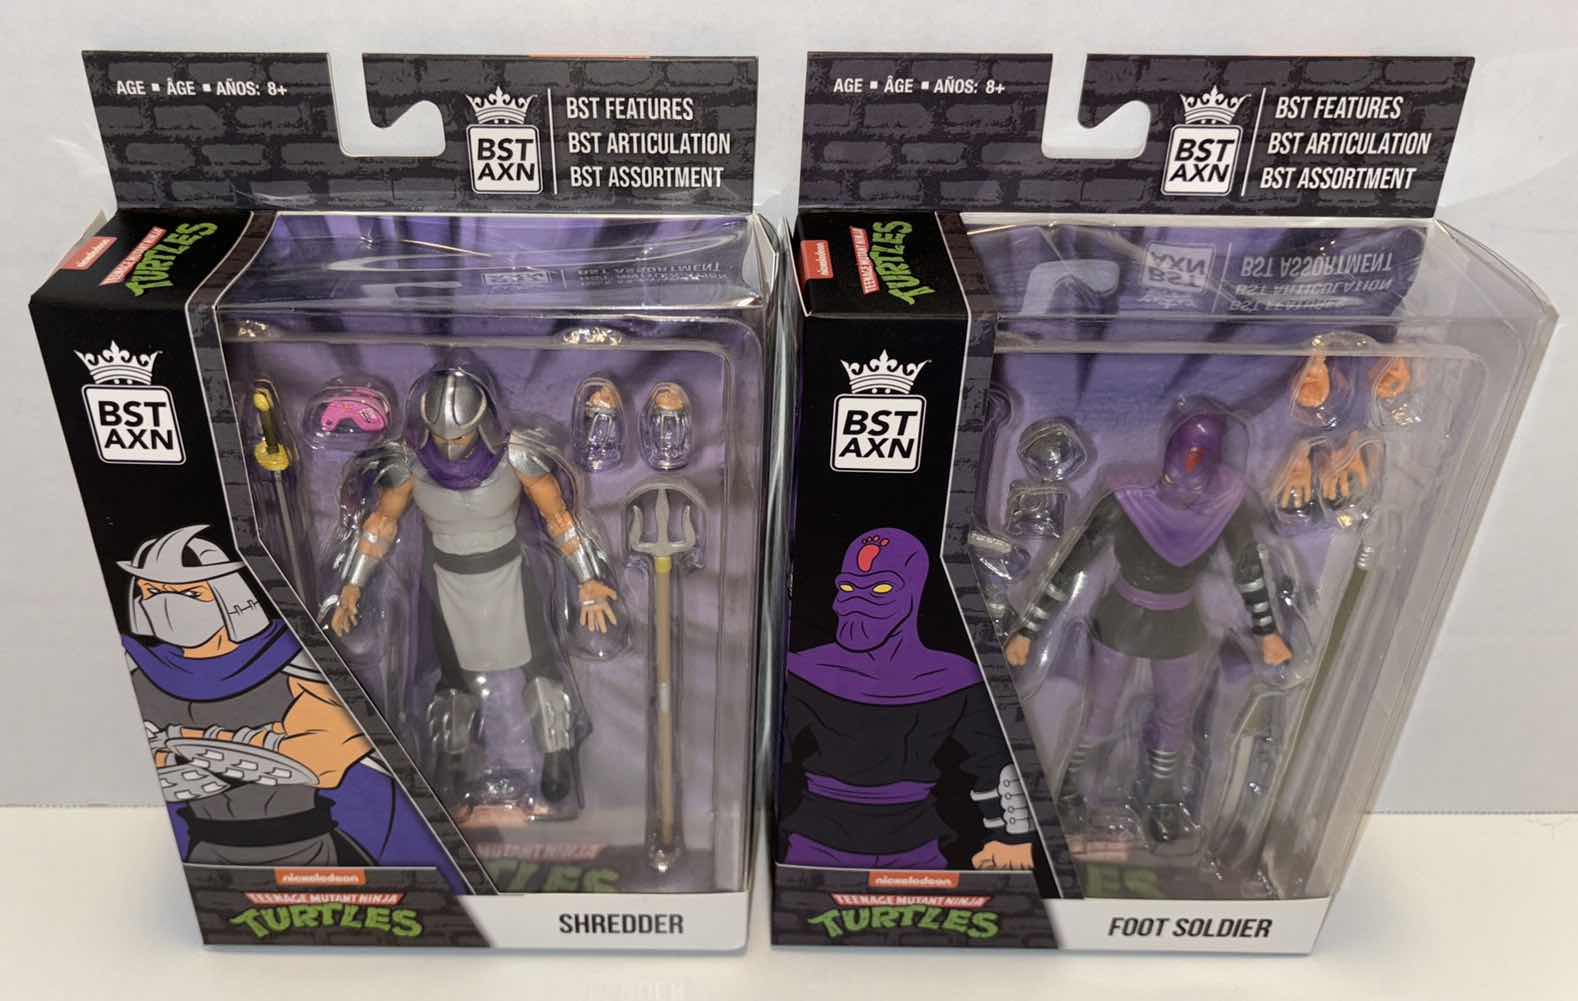 Photo 1 of NEW LOYAL SUBJECTS BST AXN TEENAGE MUTANT NINJA TURTLES ACTION FIGURE & ACCESSORIES 2-PACK, “SHREDDER” & “FOOT SOLDIER”